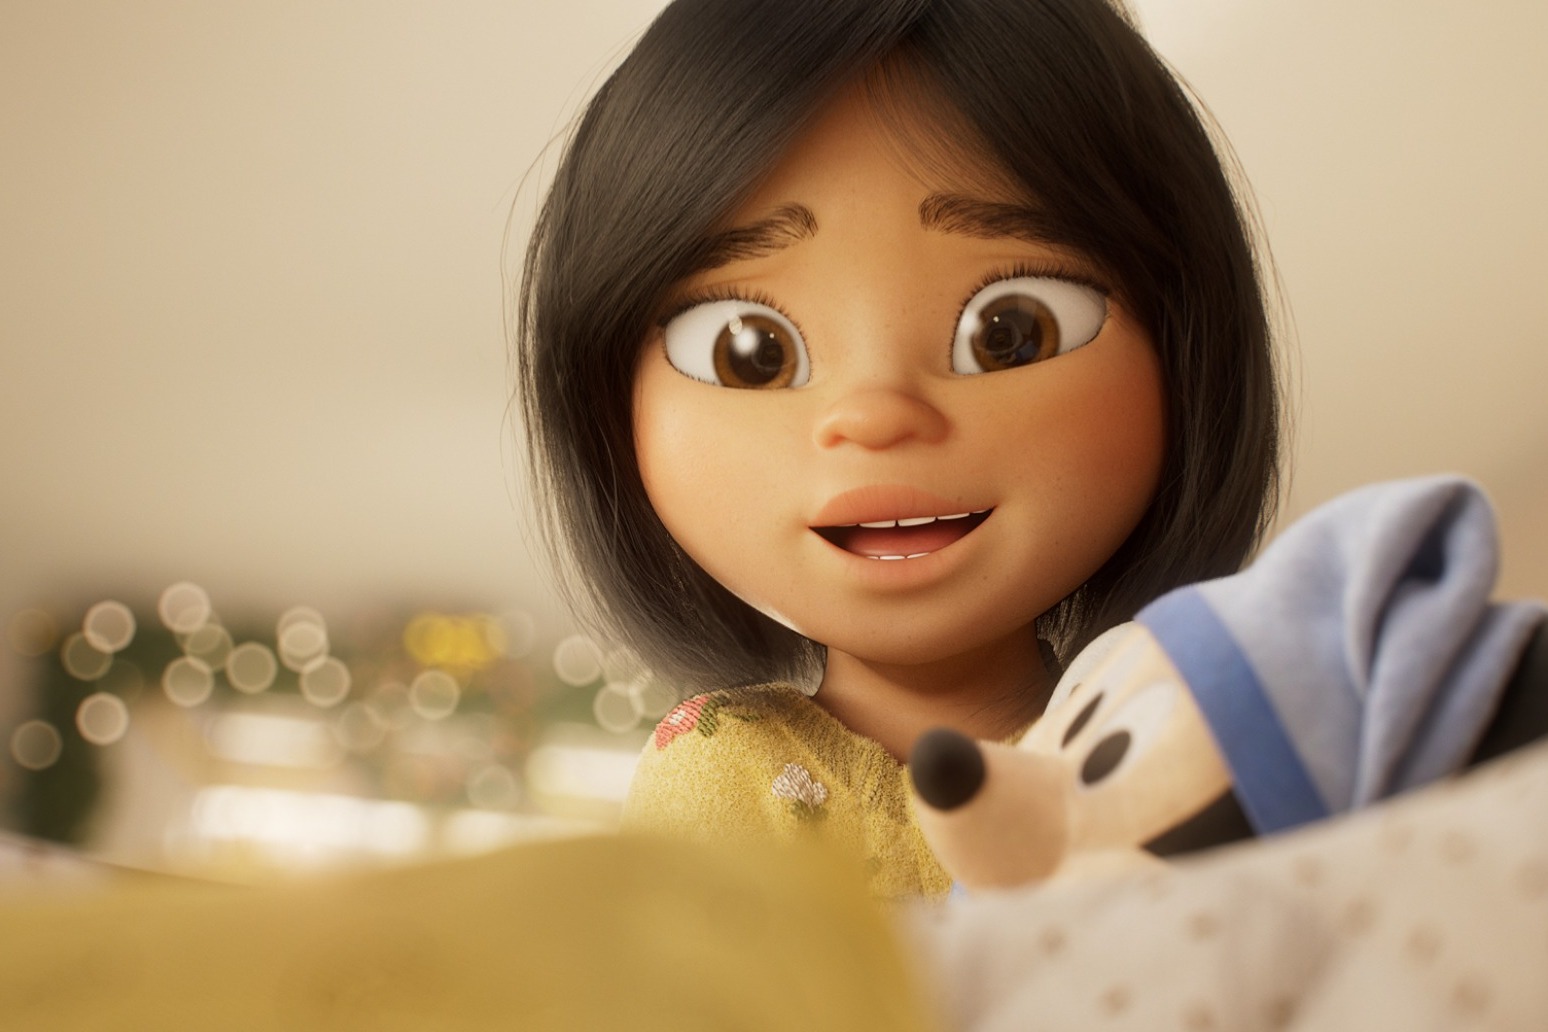 Final part of Disney festive trilogy tells story of girl welcoming baby sibling 